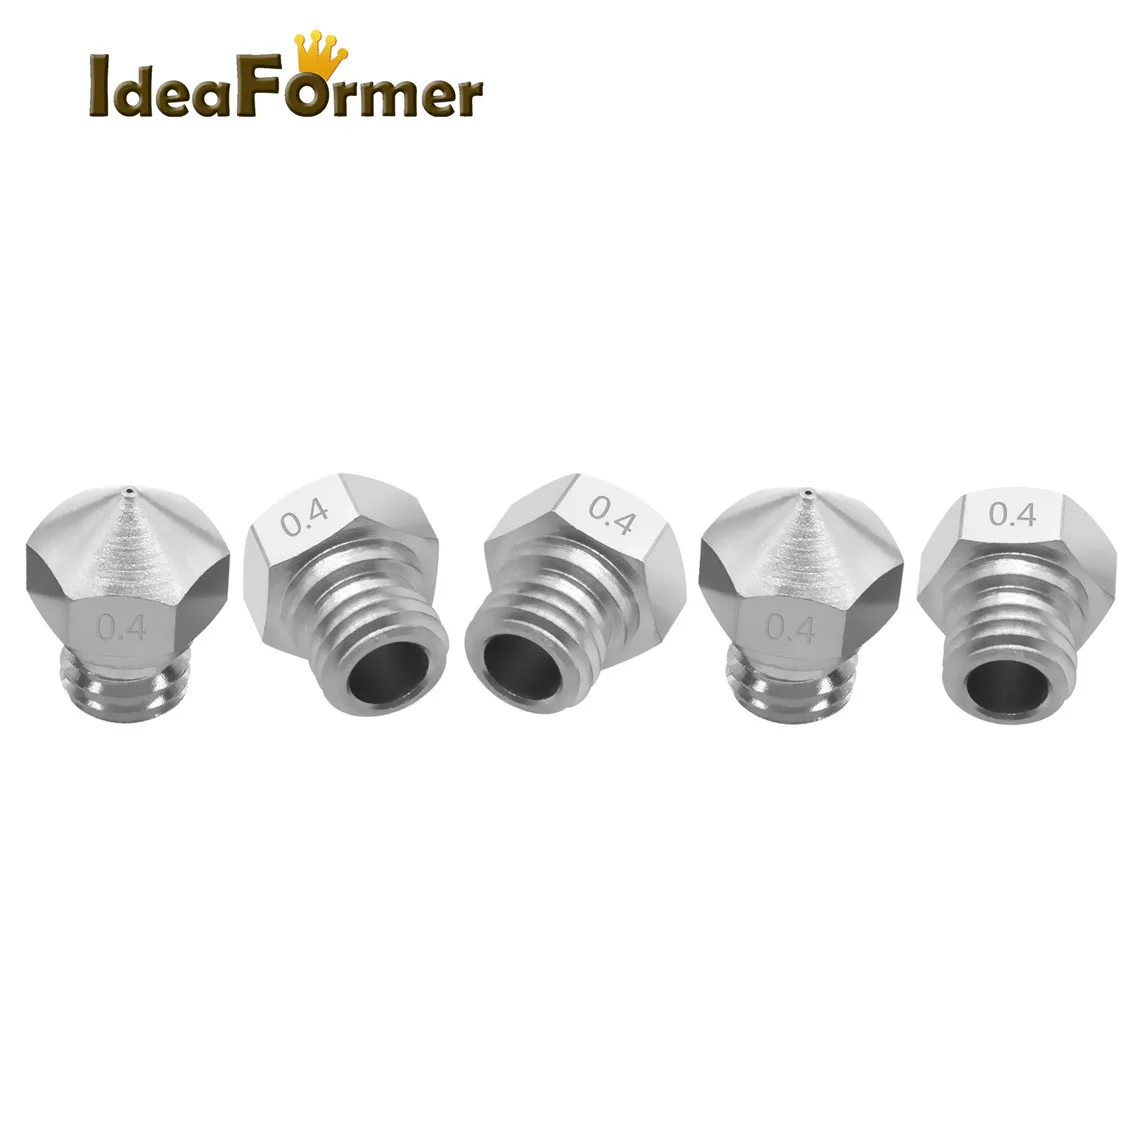 IdeaFormer 5Pcs/Lot 3D Printer Accessories MK10 MK2 Stainless Steel Nozzle M7 Screw Thread Nozzle Bore 0.4mm For 1.75mm Filament images - 6